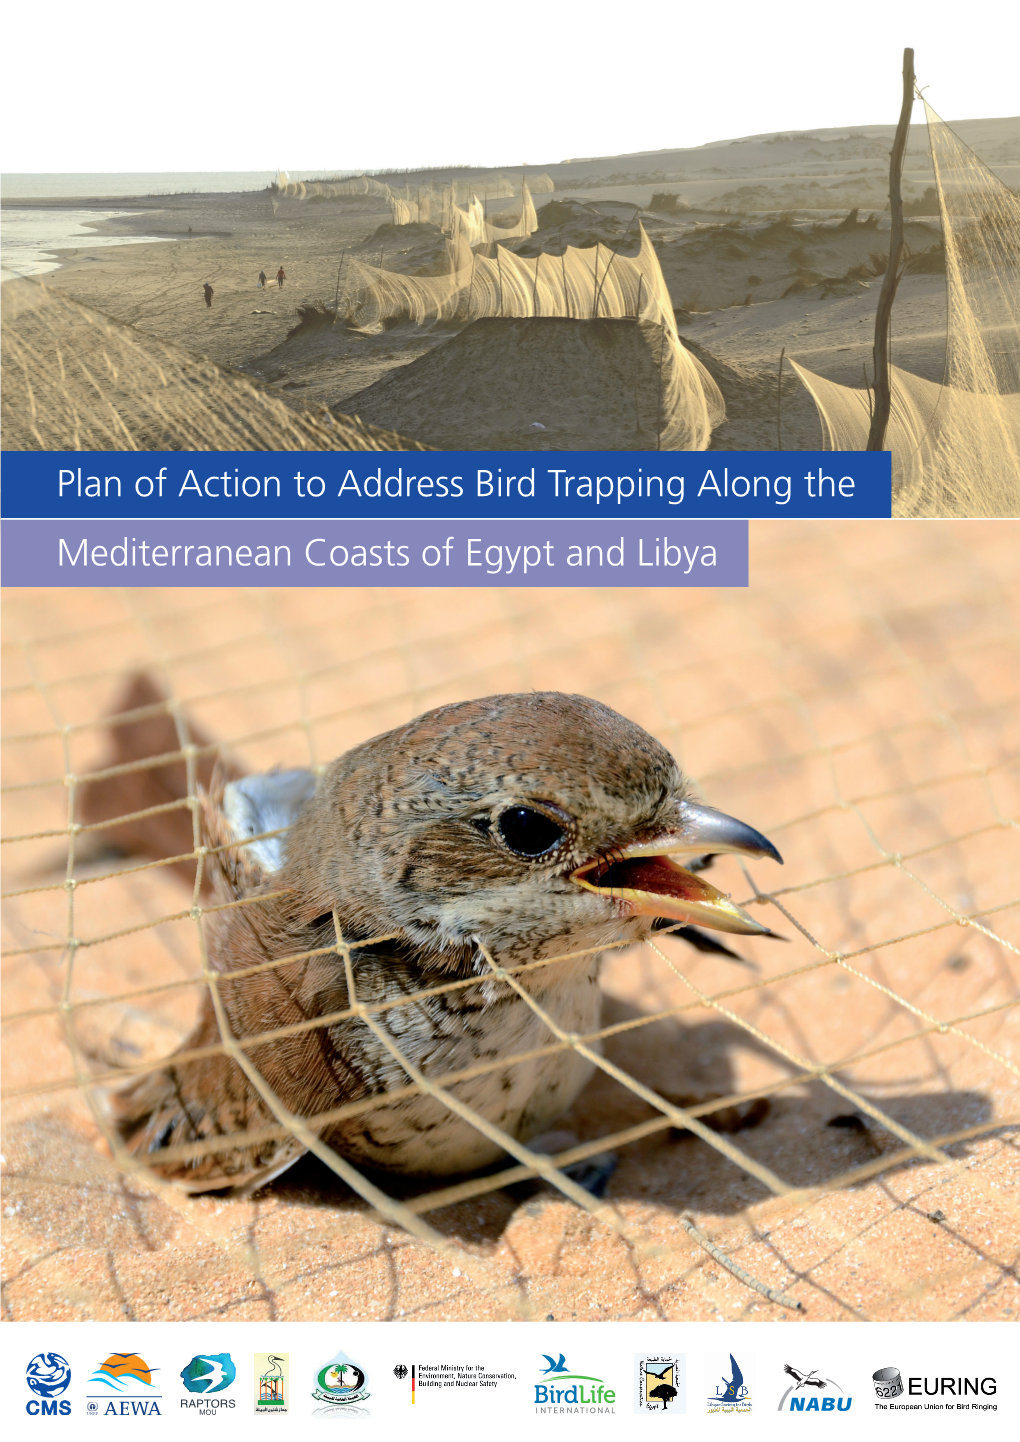 The Plan of Action to Address Bird Trapping Along the Mediterranean Coasts of Egypt and Libya